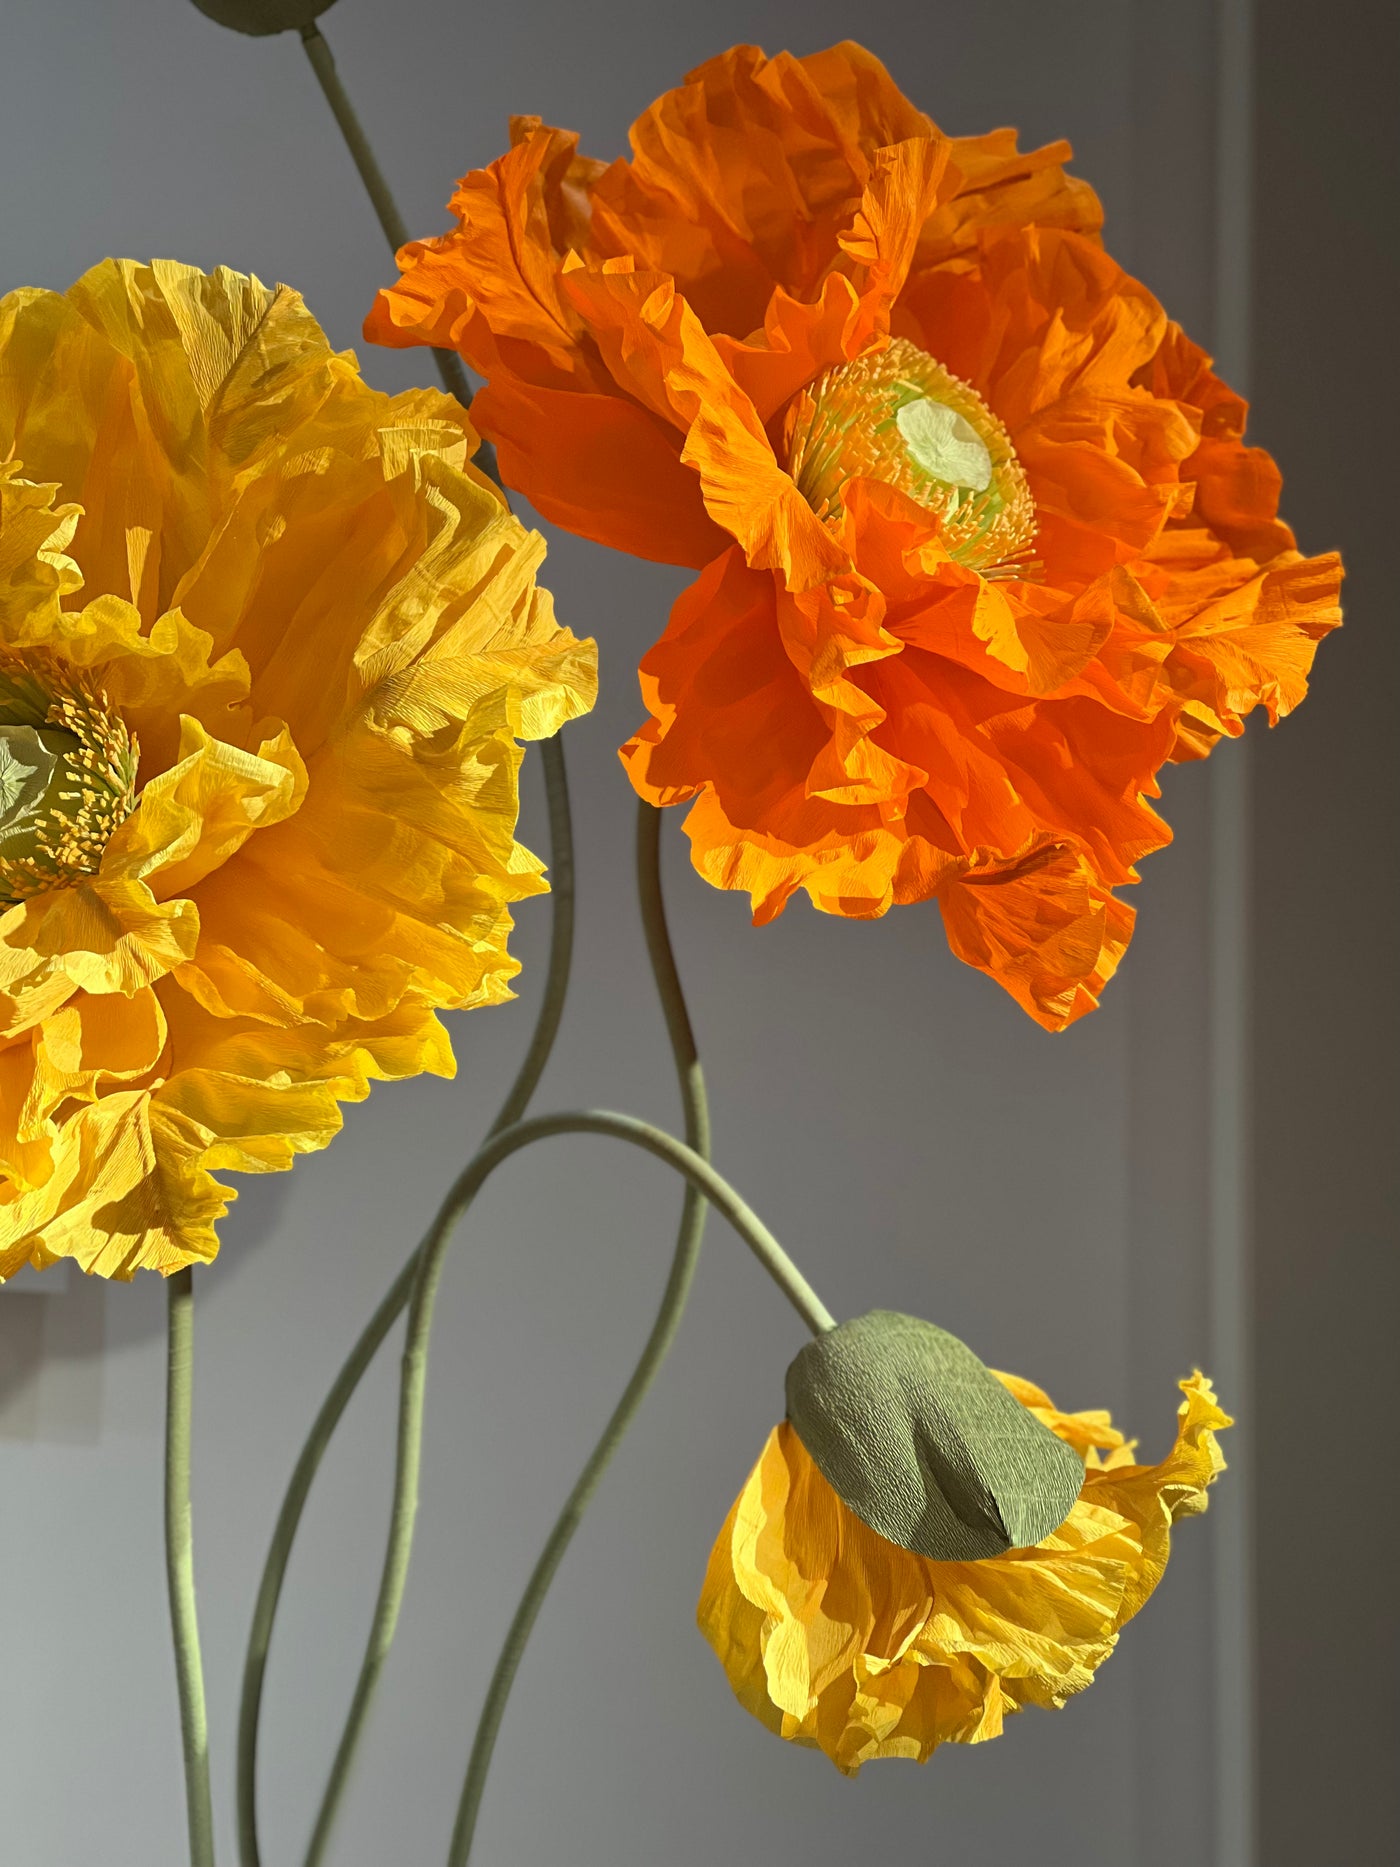 Impressive Giant Free-Standing Paper Poppies